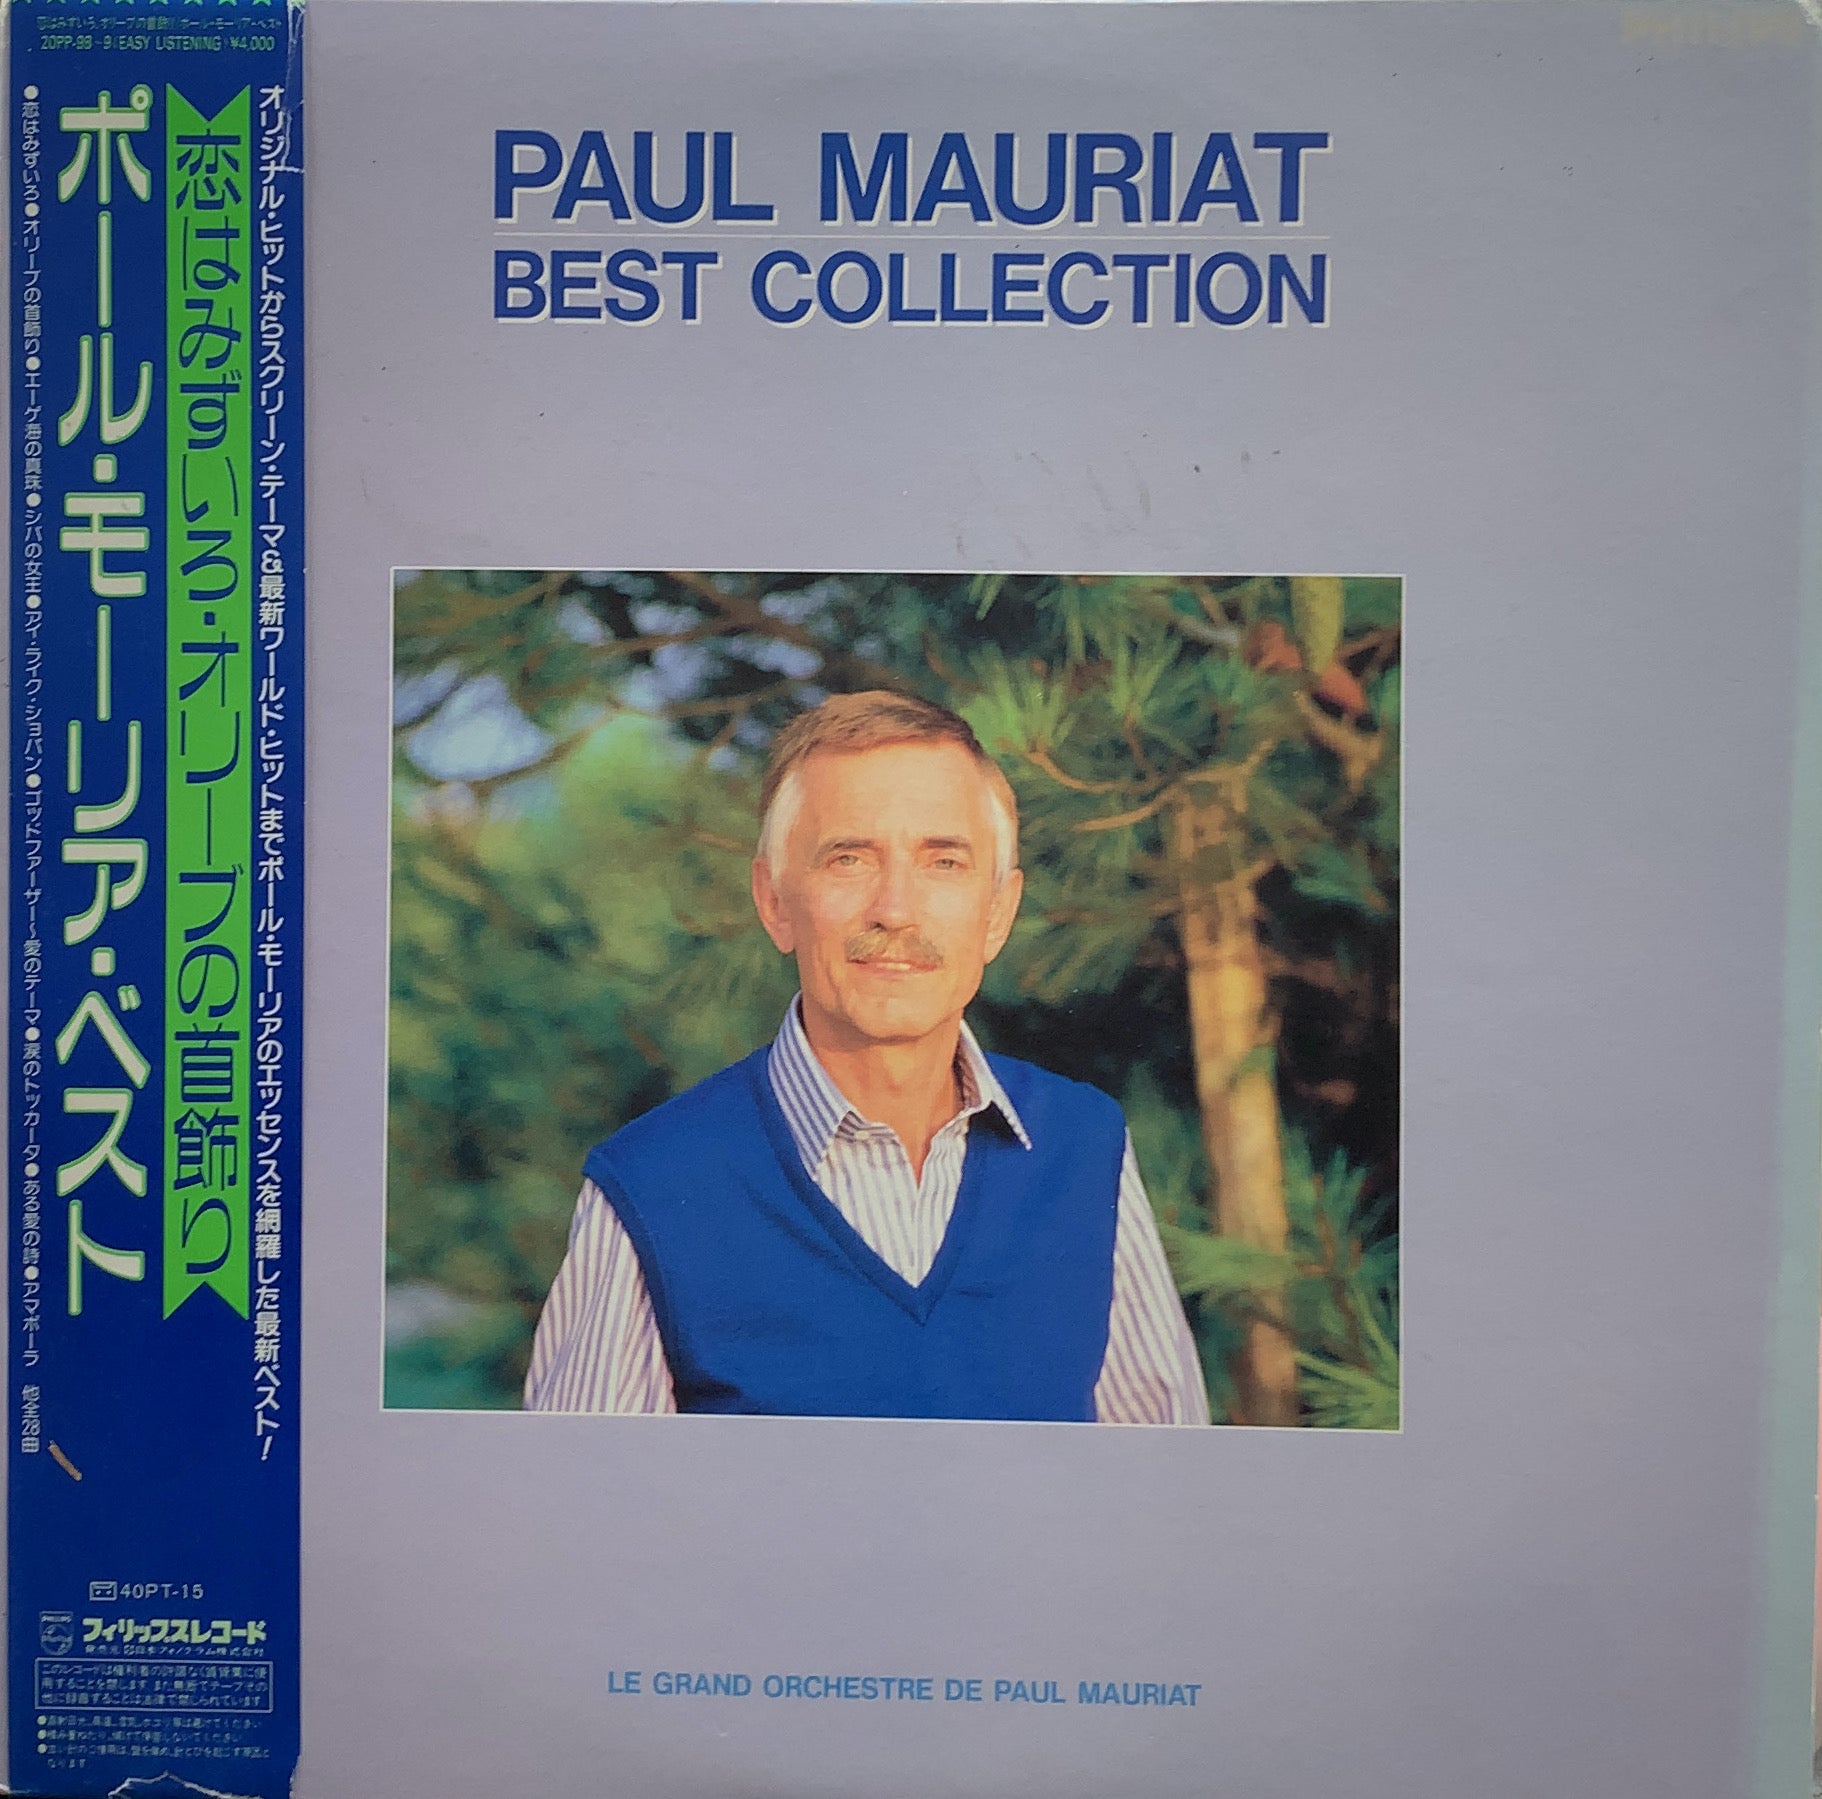 PAUL MAURIAT AND HIS ORCHESTRA / BEST COLLECTION